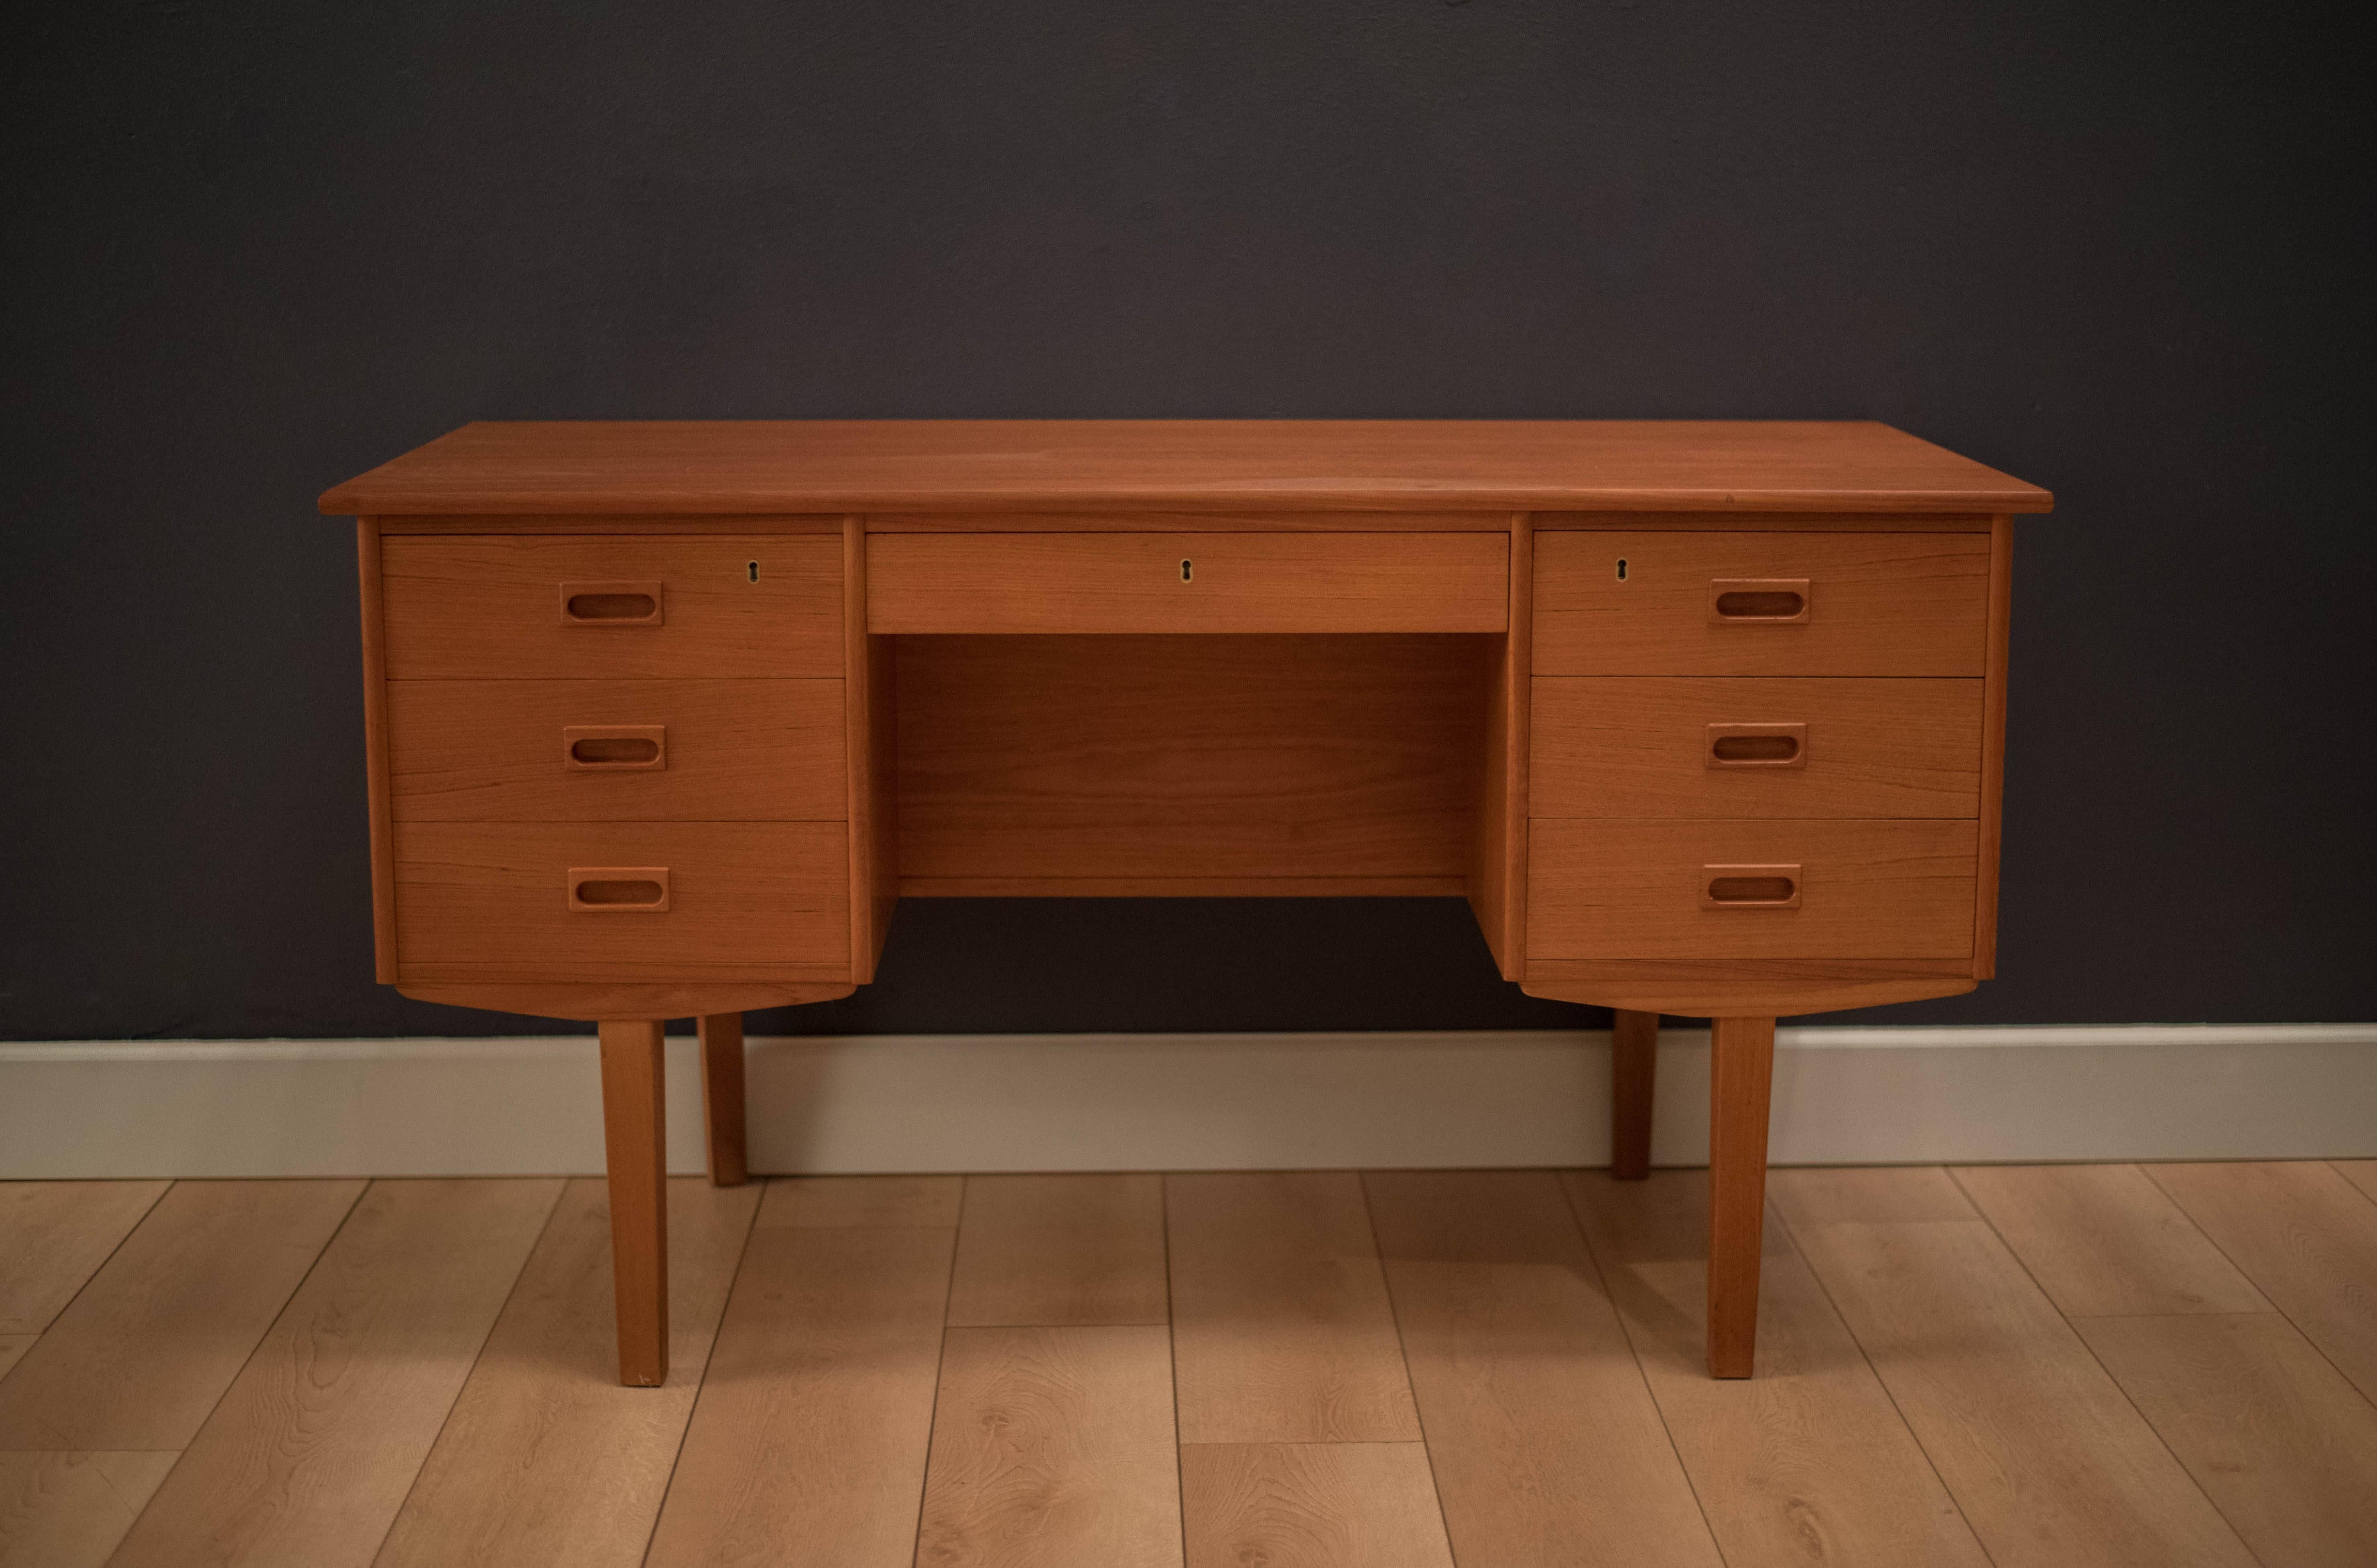 Mid-Century Danish modern desk in teak, circa 1960s. This piece comes with seven dovetailed drawers and a finished bookshelf display. Skeleton key not included.

